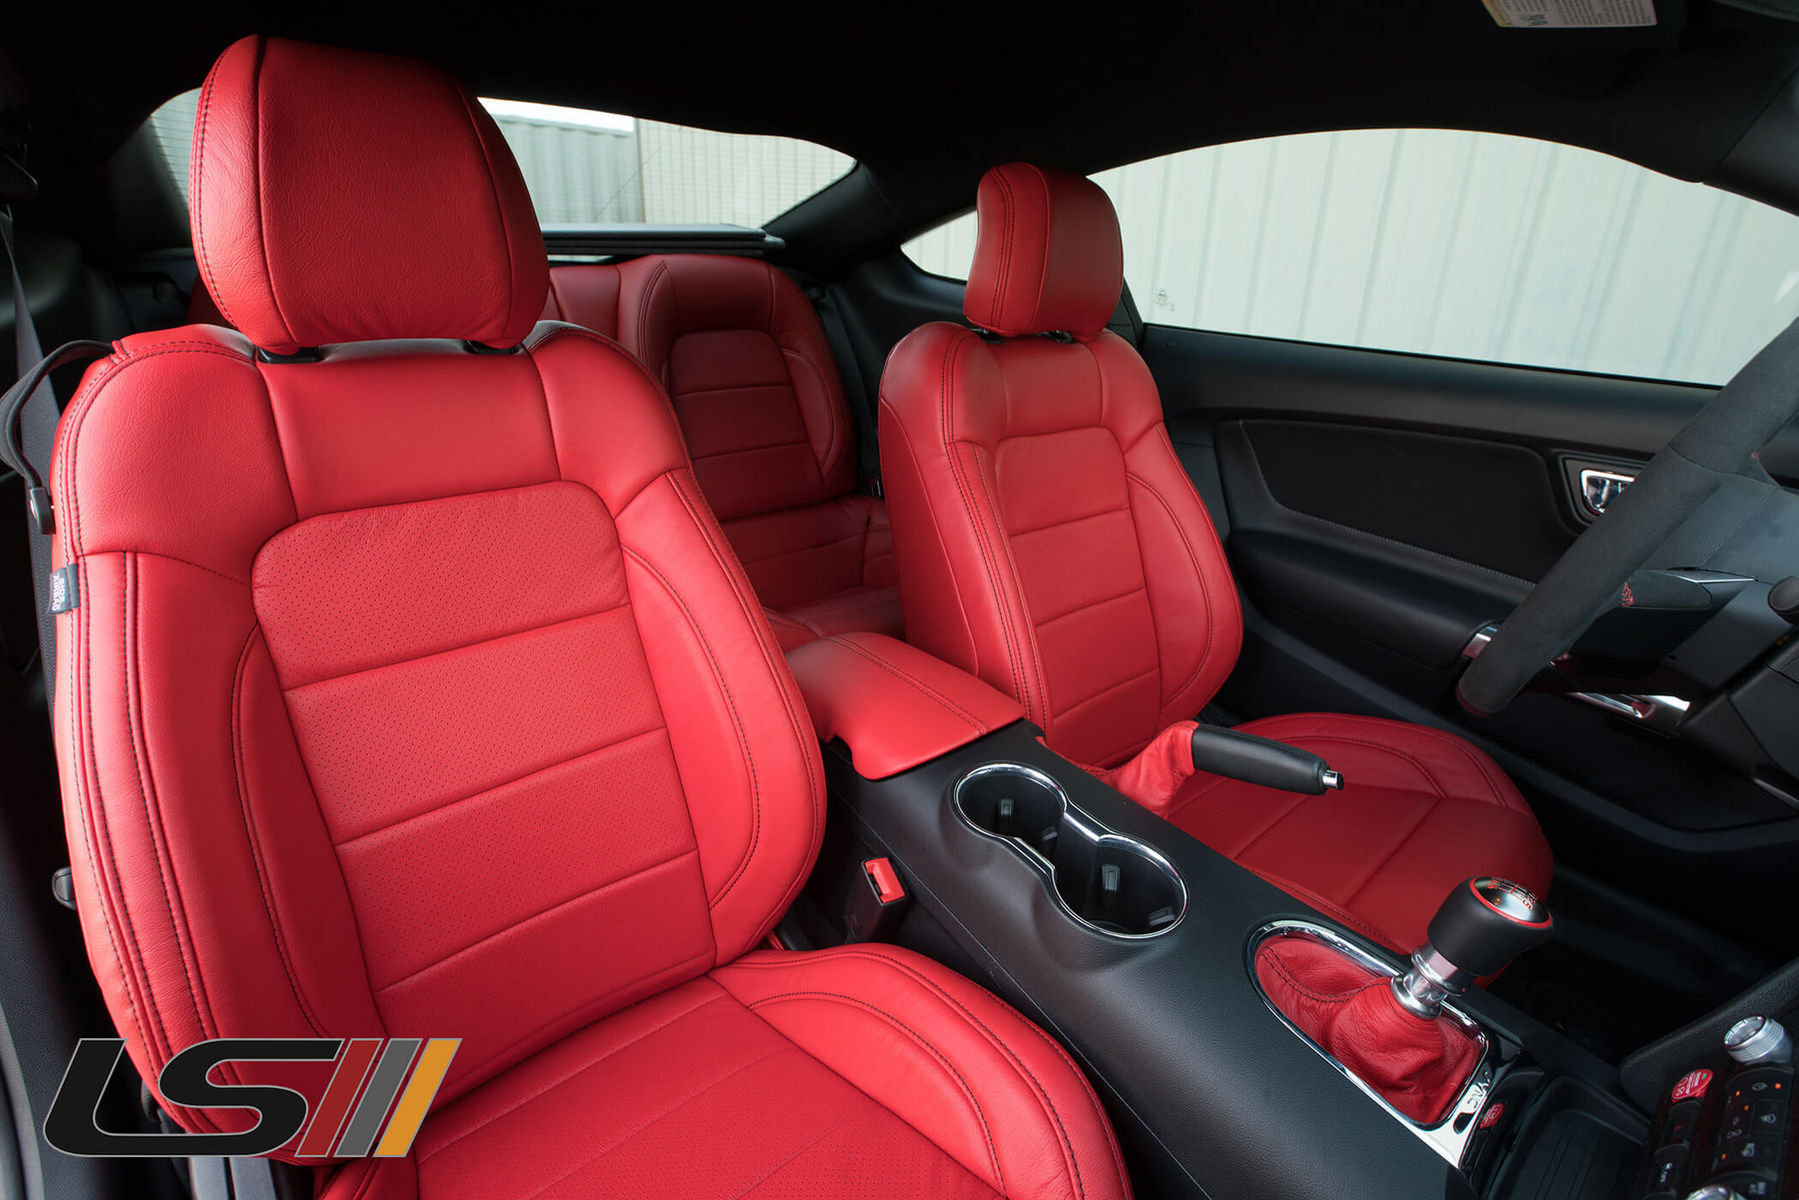 2016 Mustang Gt Leather Interior By Leatherseats Com